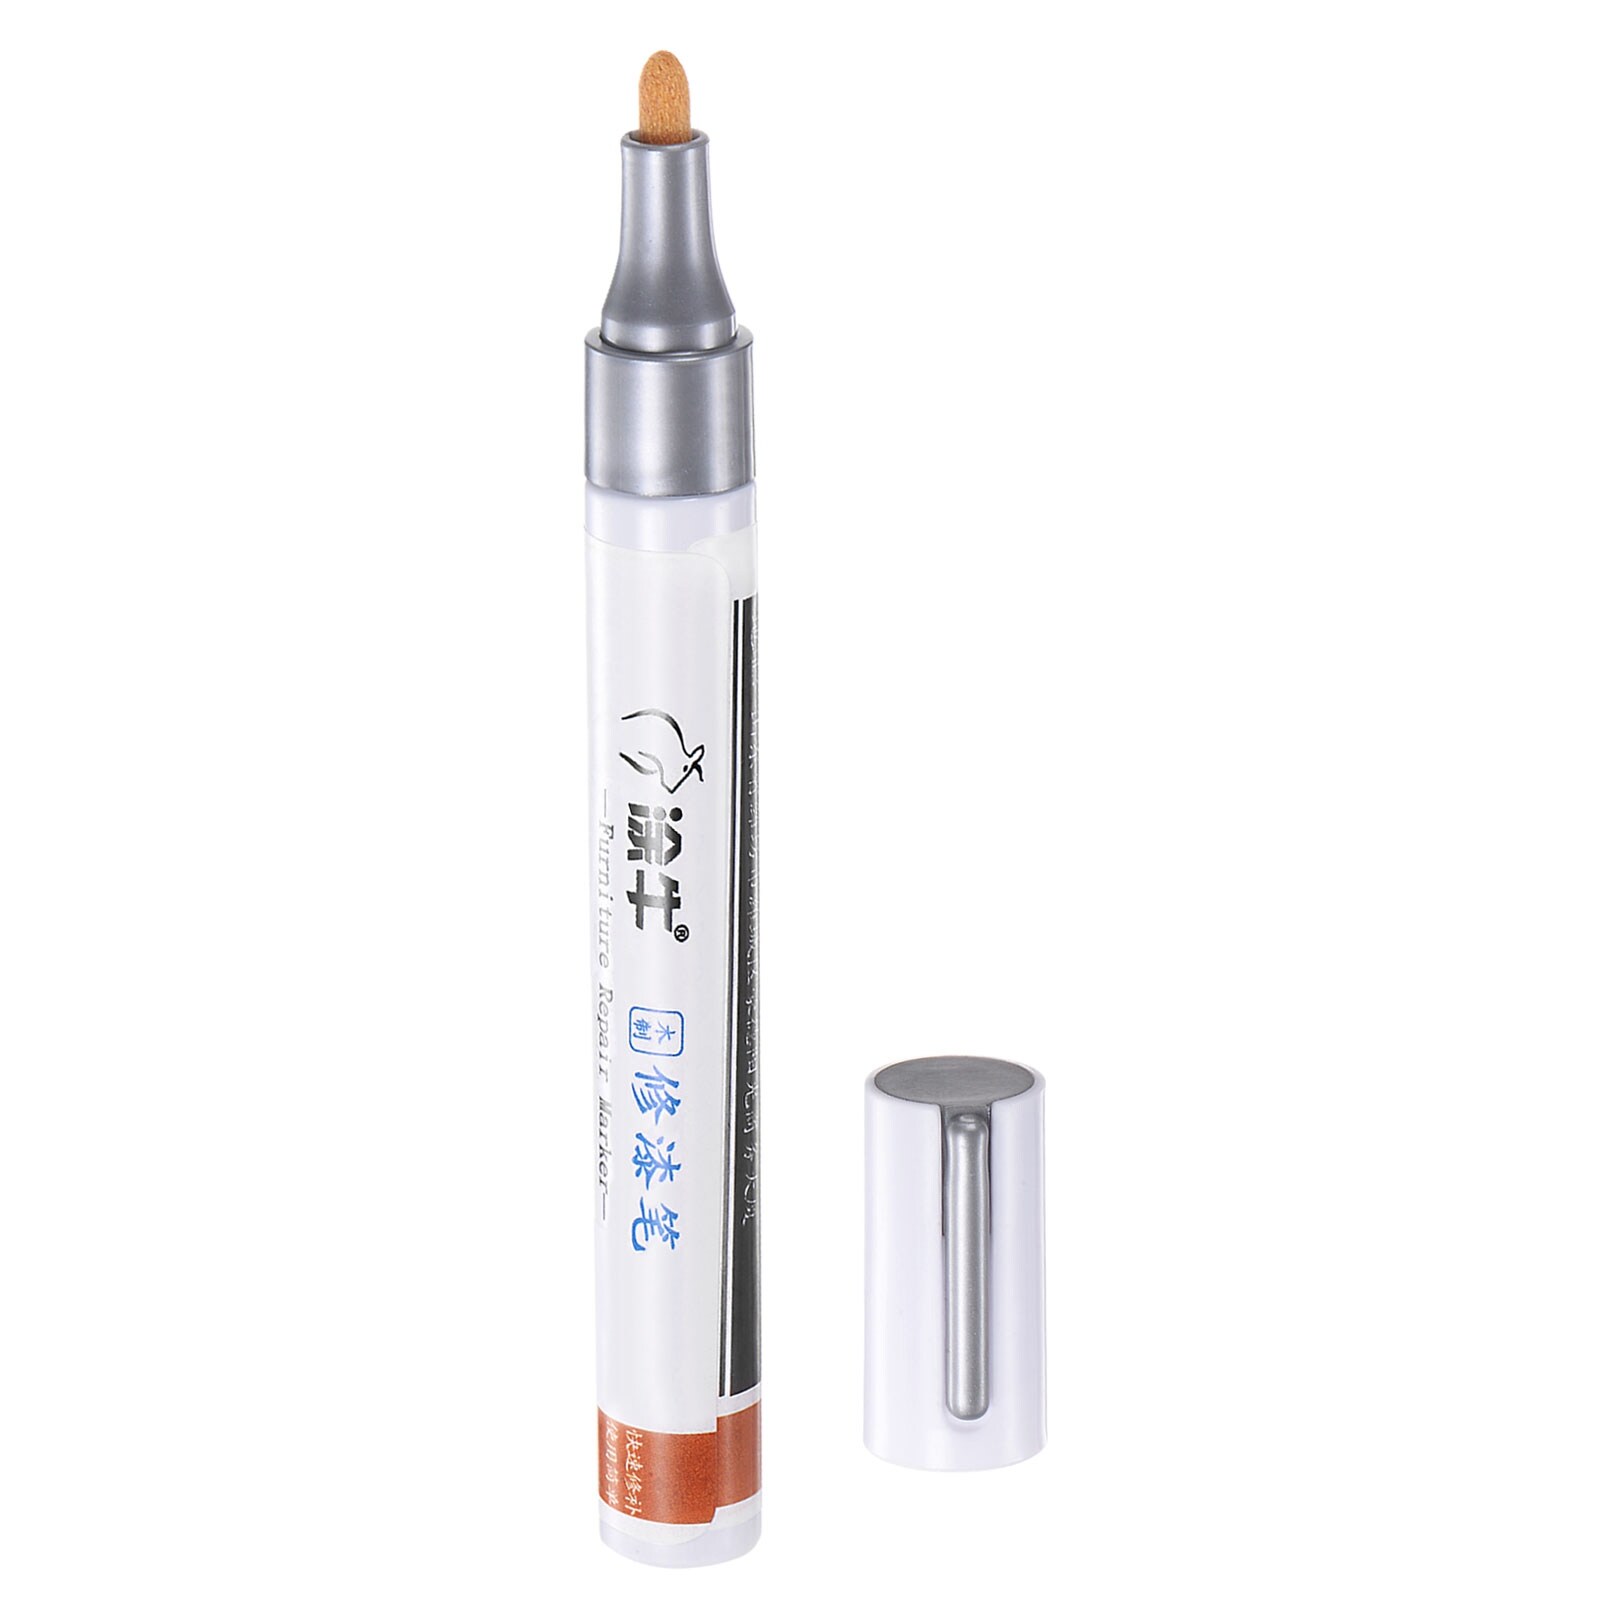 https://ak1.ostkcdn.com/images/products/is/images/direct/04f51416104435a04aee05369fb803b68d0ba1de/Furniture-Markers-Touch-Up-Wood-Furniture-Filler-Pen%2C-Silver-Tone.jpg